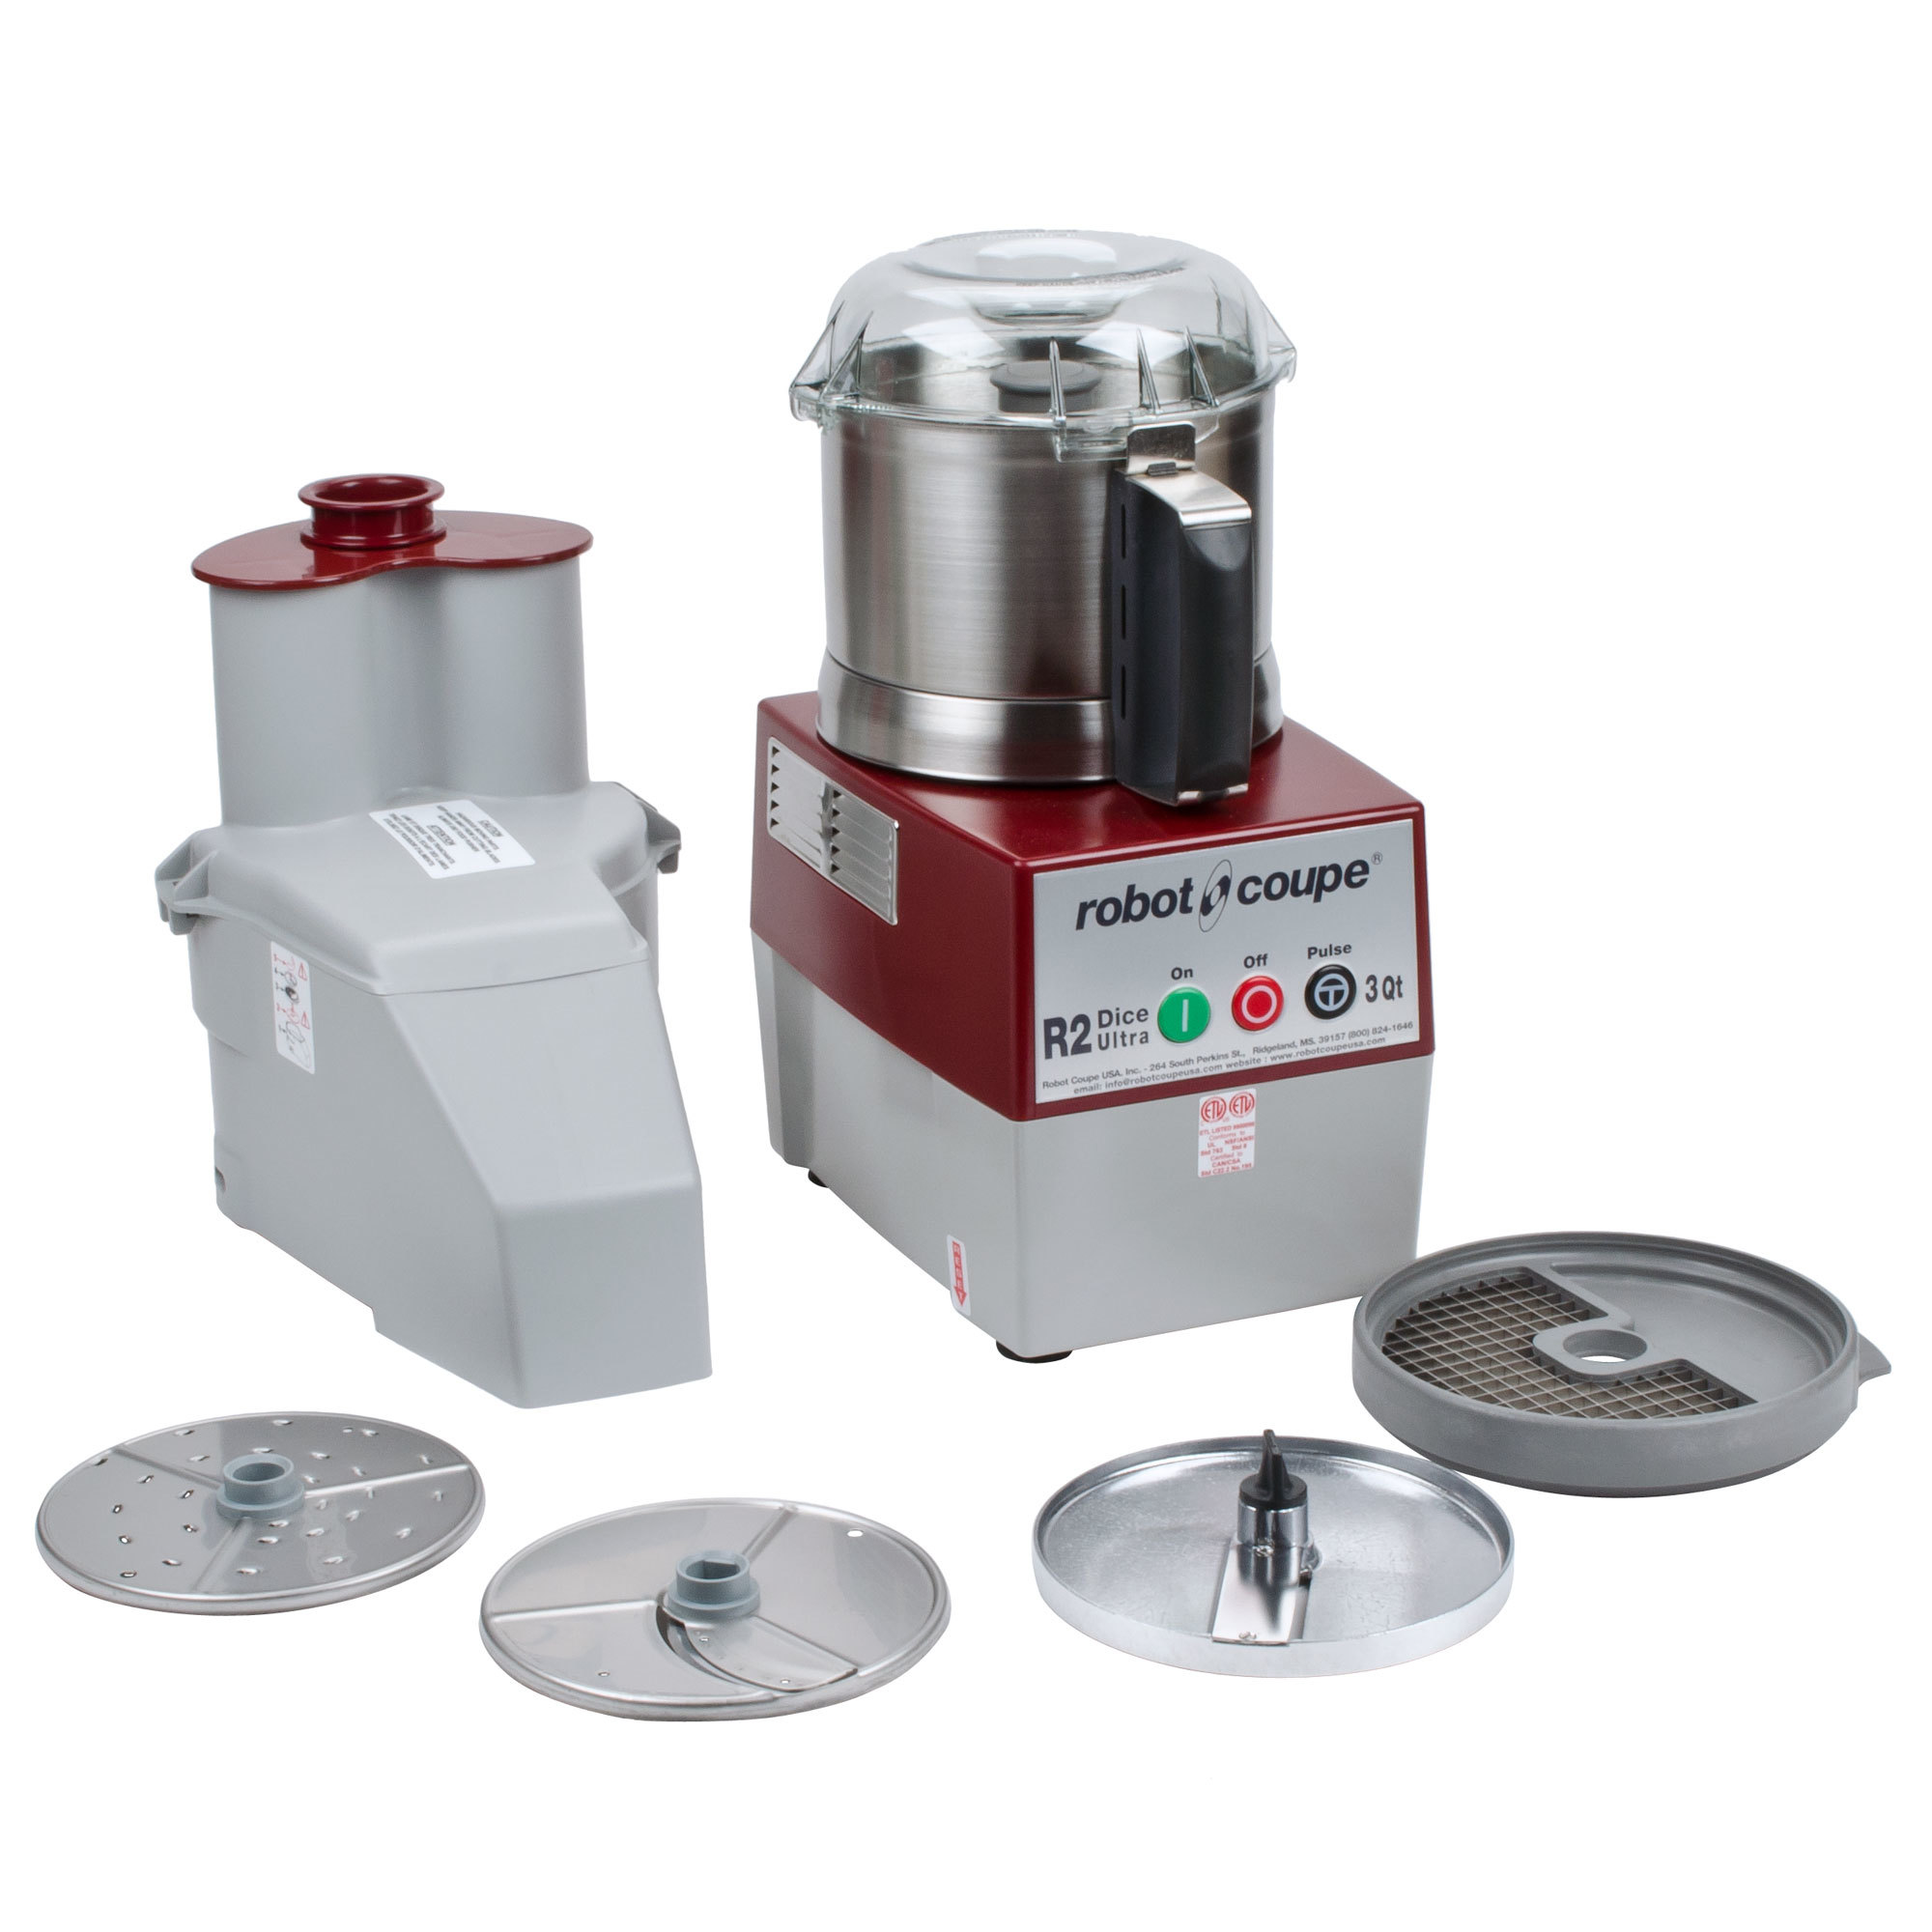 Robot Coupe Food Processor - Official Website USA